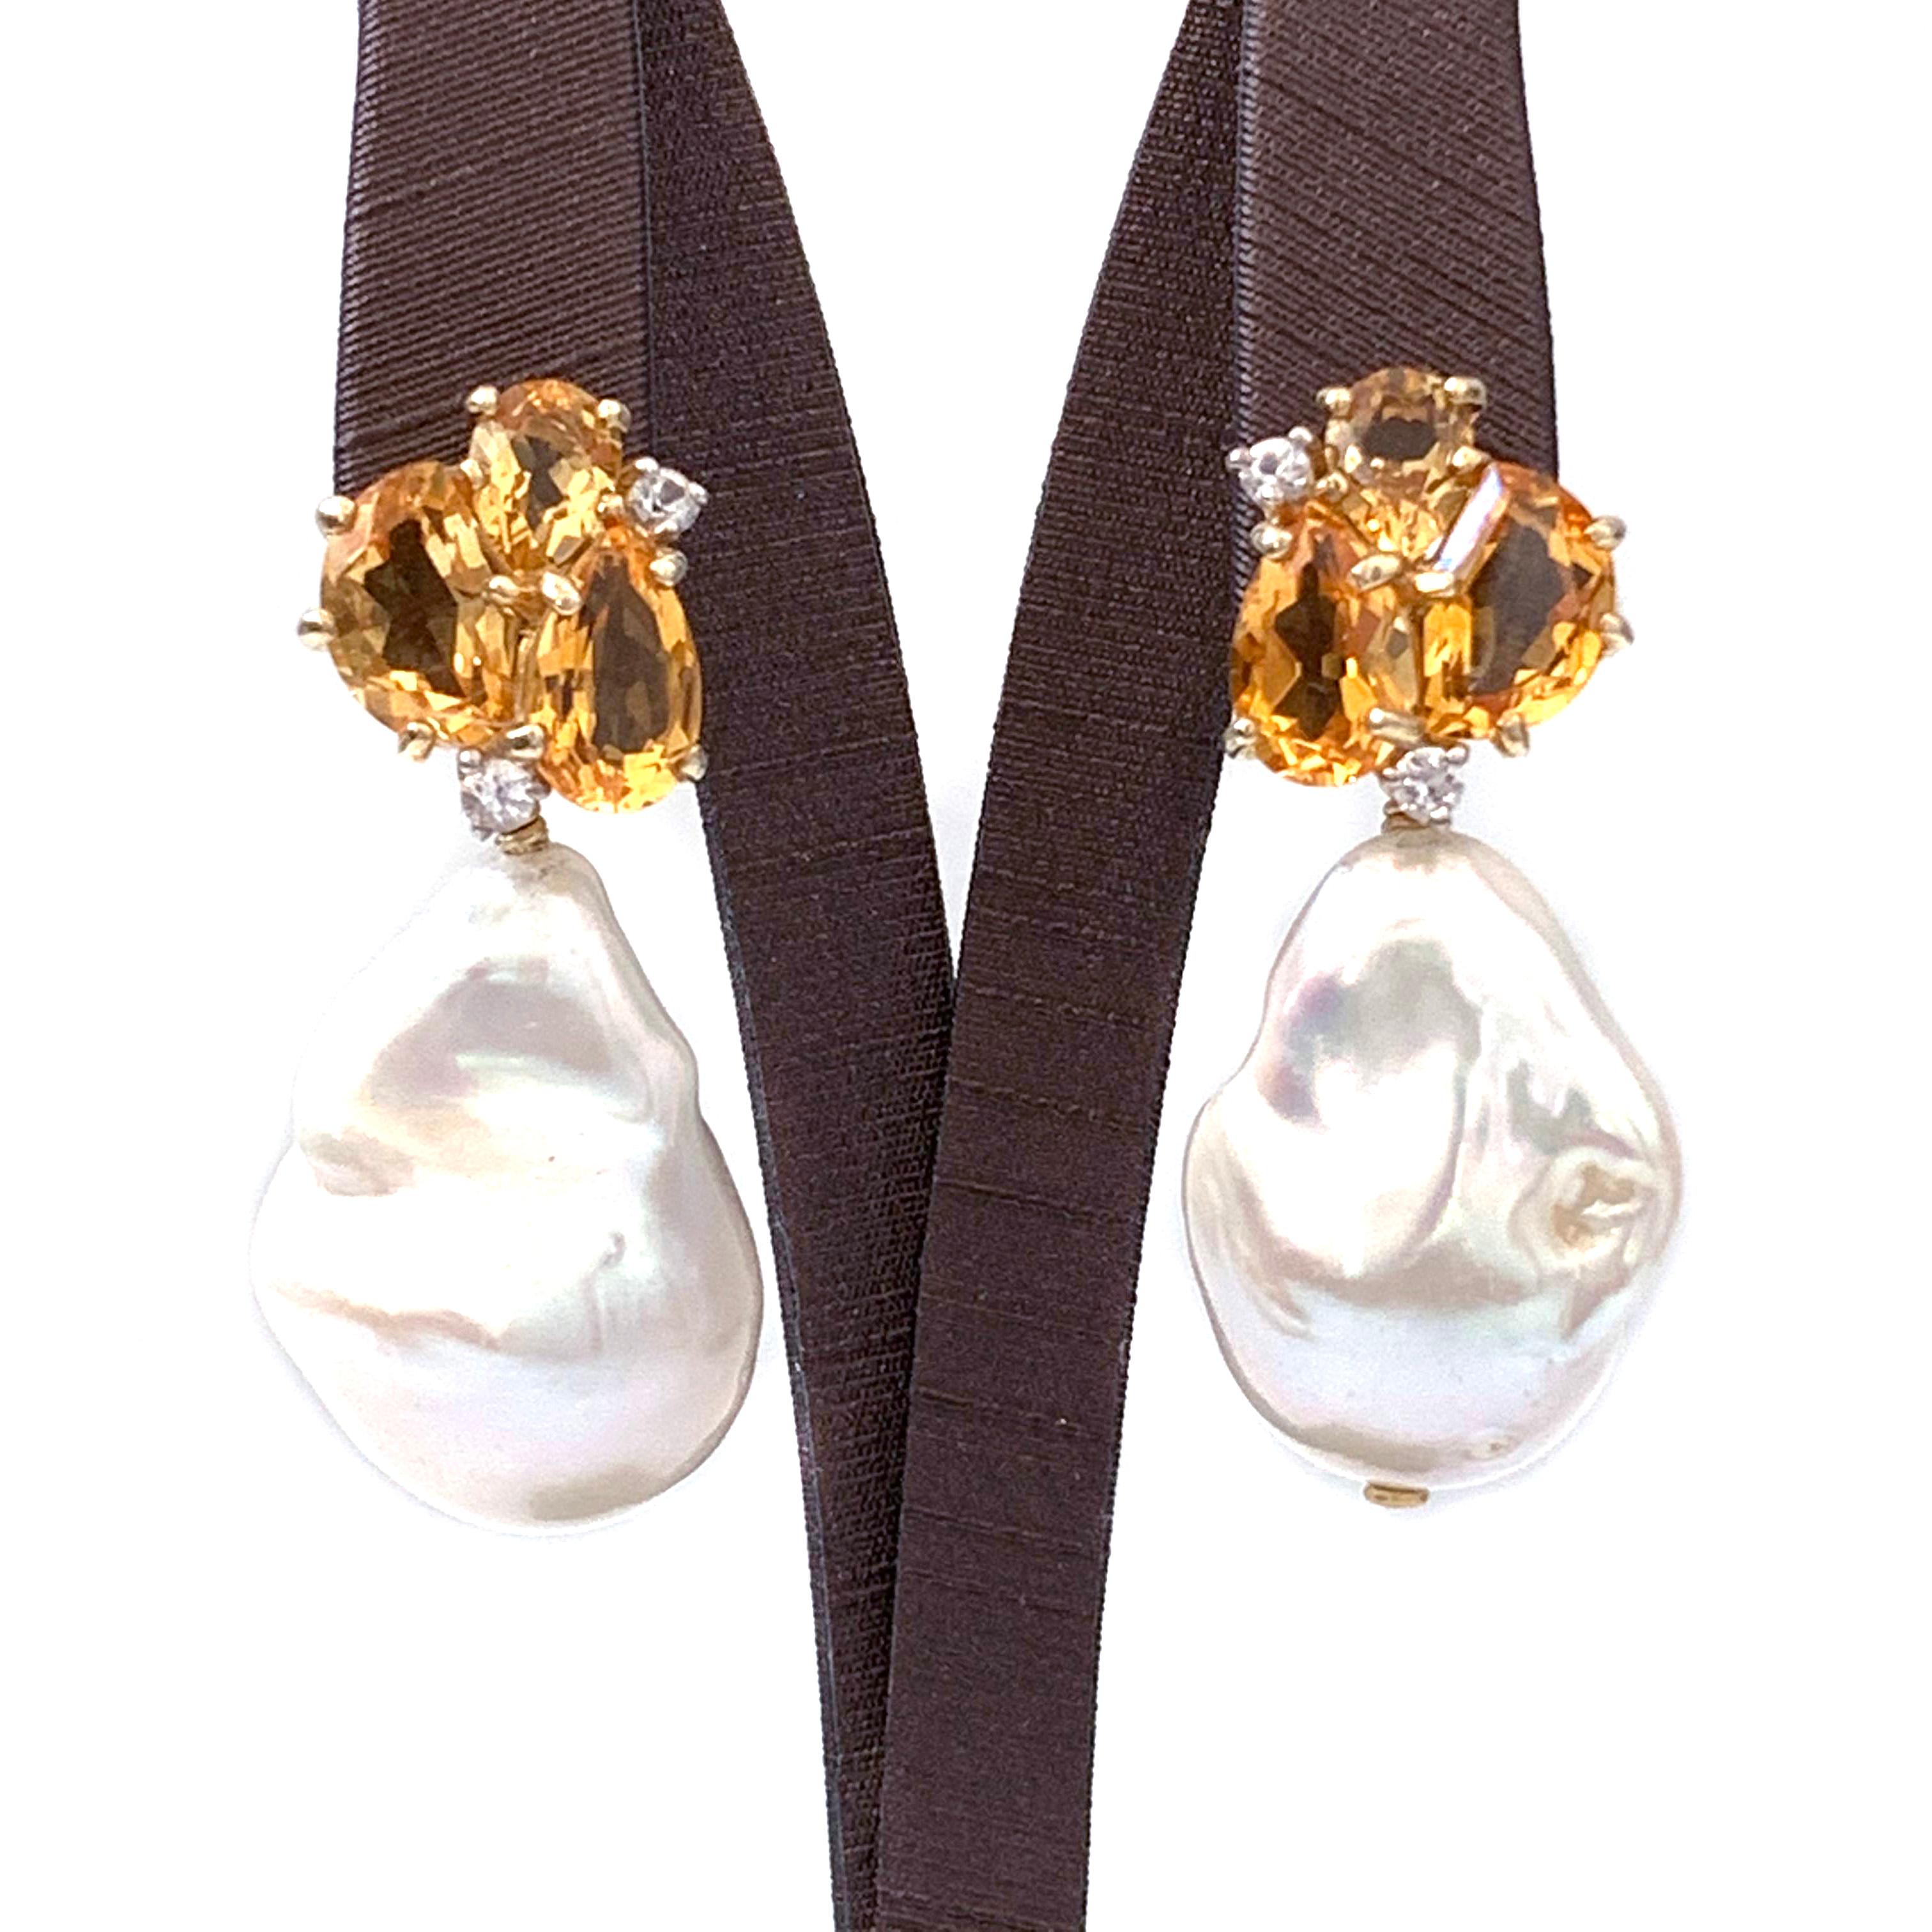 Bijoux Num Fancy-shape Citrine and Cultured Baroque Pearl Drop Earrings

These earrings feature cluster of genuine fancy-cut citrine, round white sapphire, and large cultured baroque pearl drop. The baroque pearls measured 17x25mm. Handset and wire